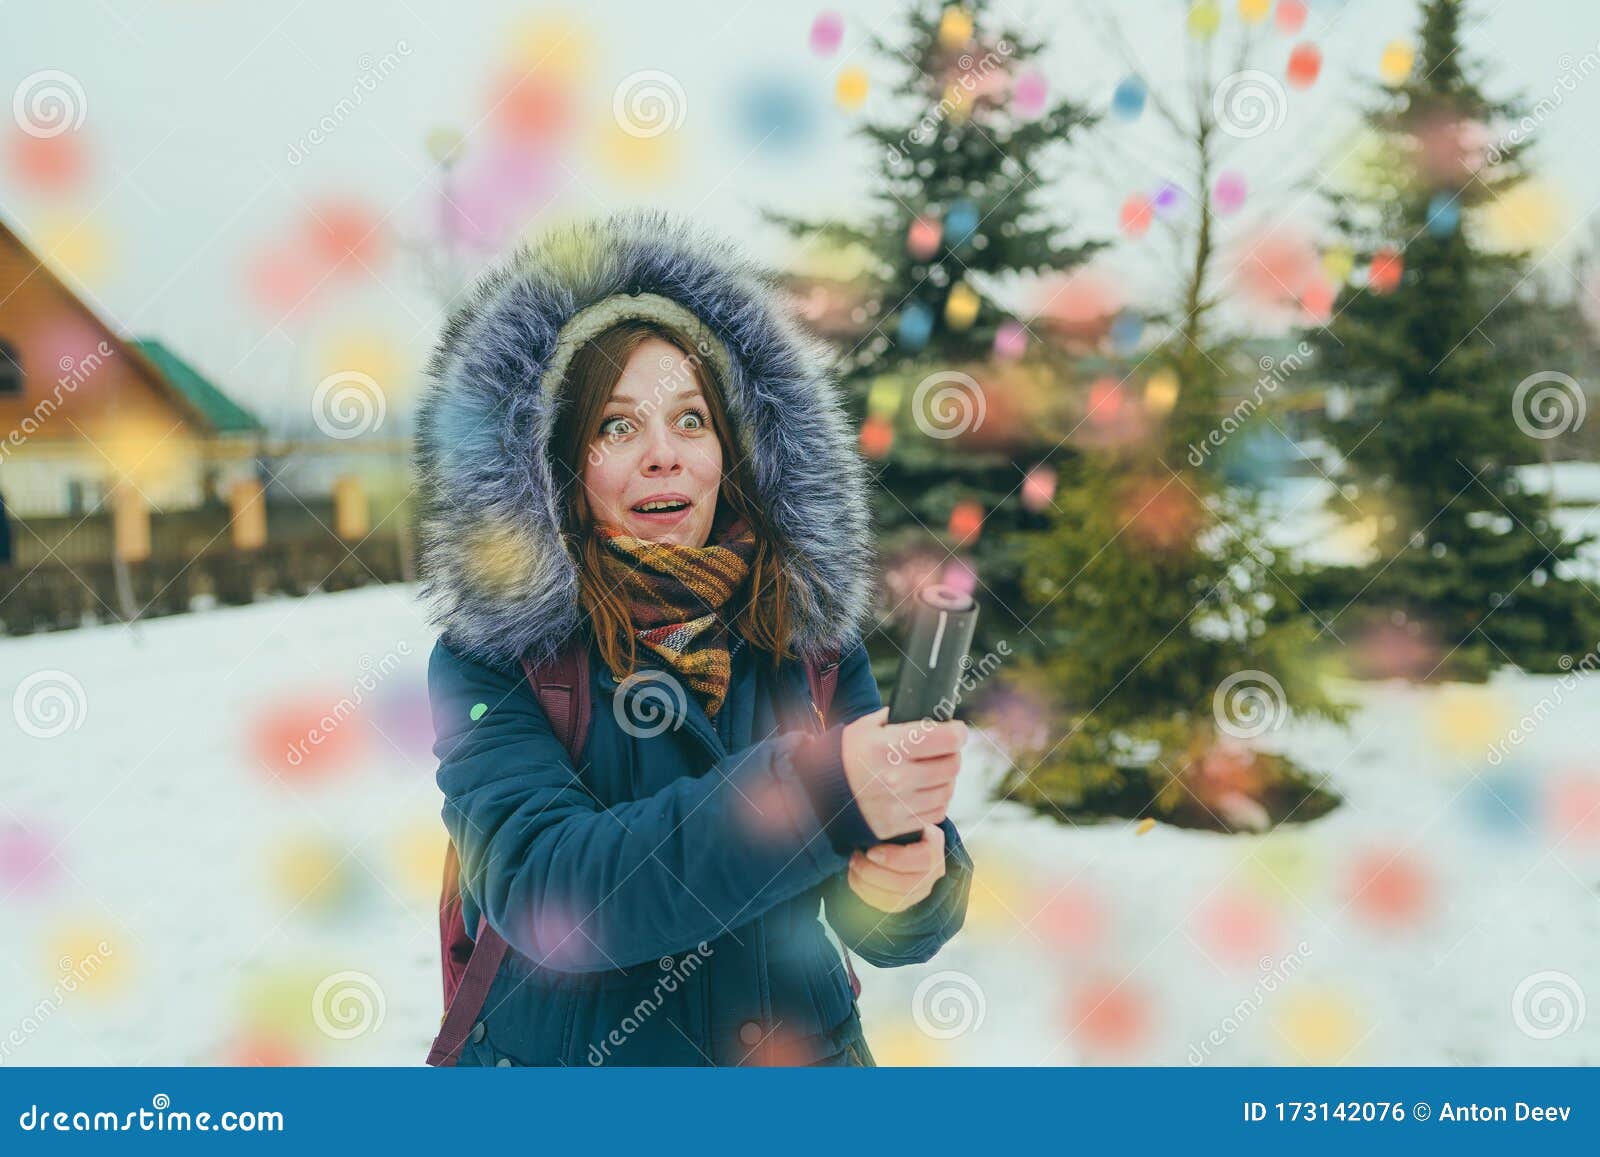 Woman Popping Confetti Petard and Screaming. Adult Female in Outwear ...